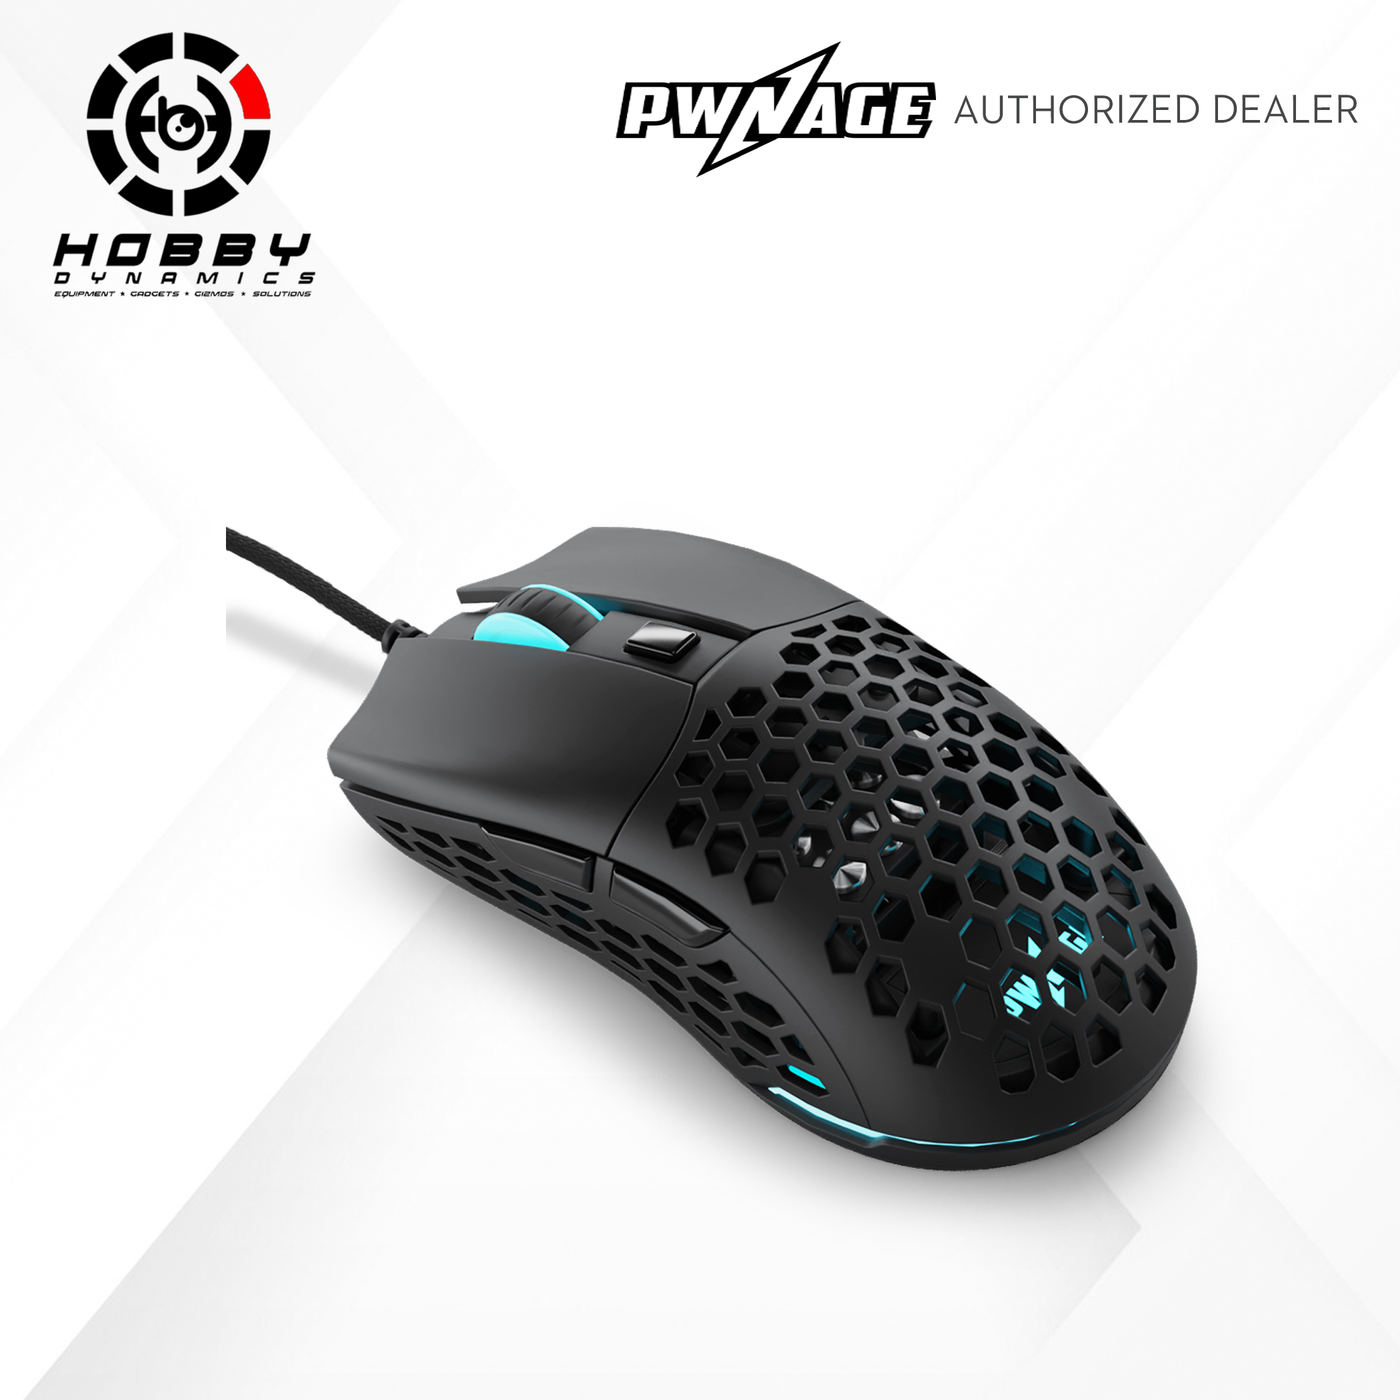 Pwnage Ultra Custom Wired Symm 2 Gaming Mouse (Honeycomb Side)